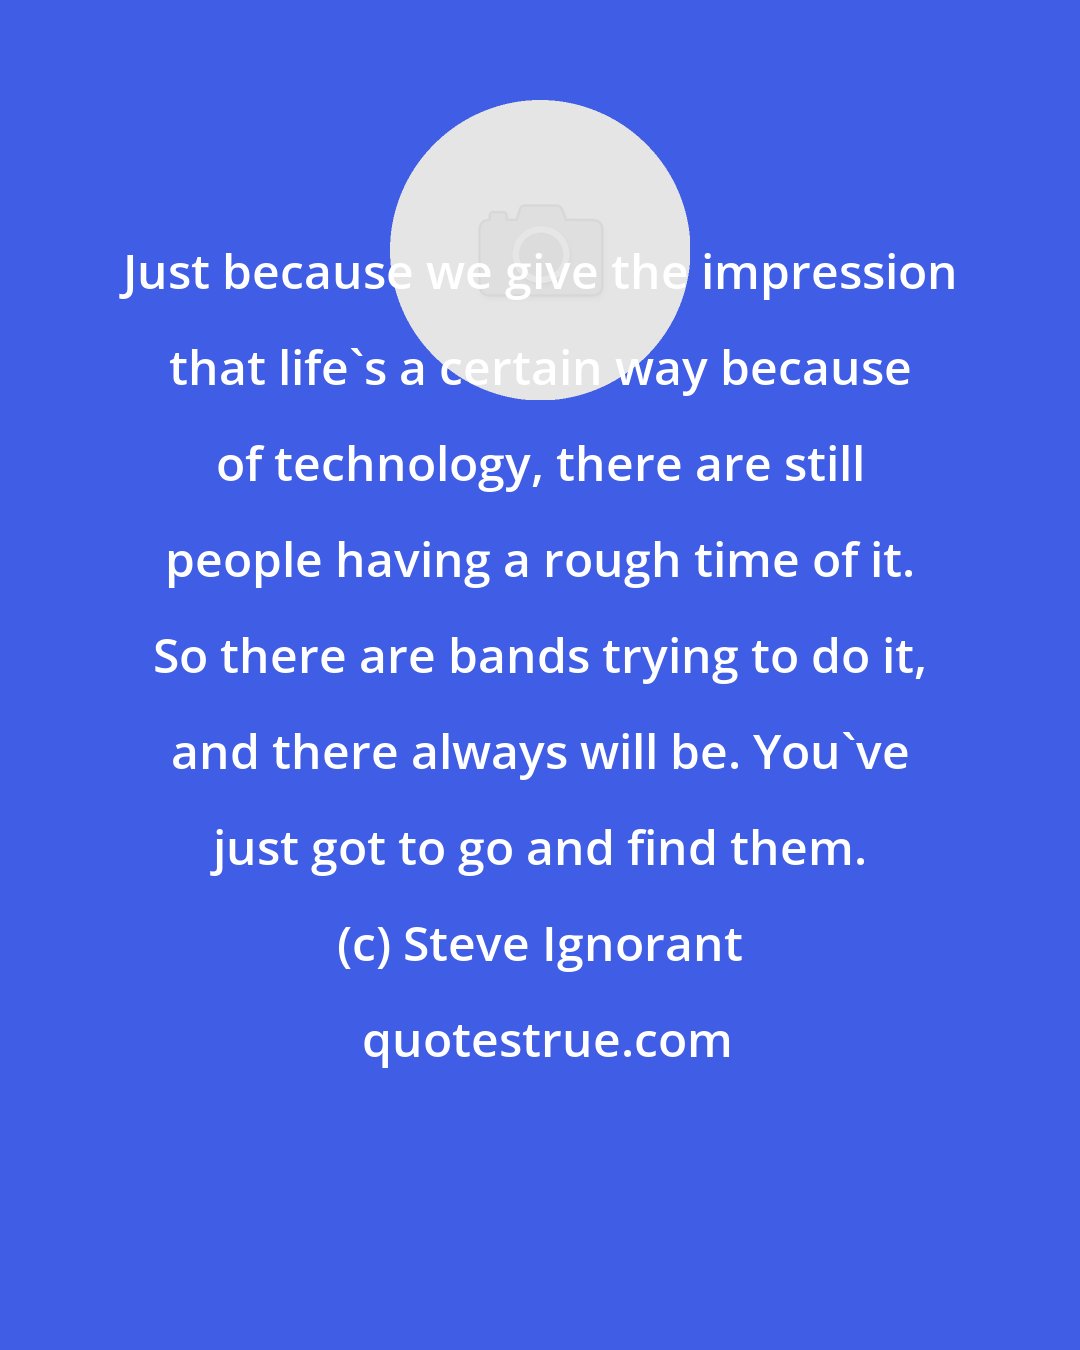 Steve Ignorant: Just because we give the impression that life's a certain way because of technology, there are still people having a rough time of it. So there are bands trying to do it, and there always will be. You've just got to go and find them.